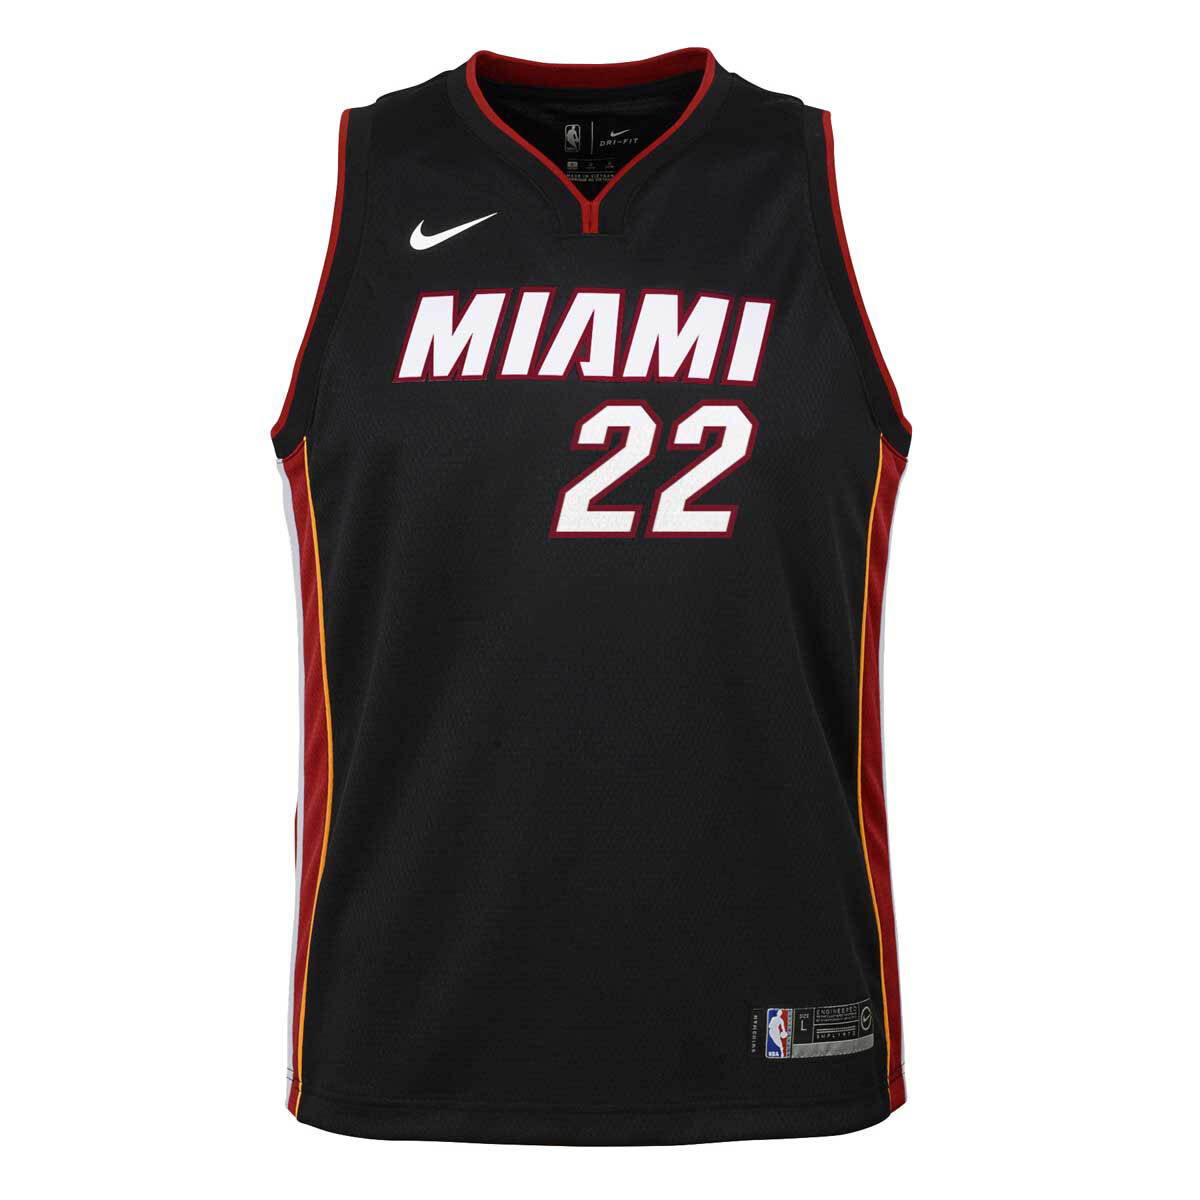 jimmy butler jersey for kids